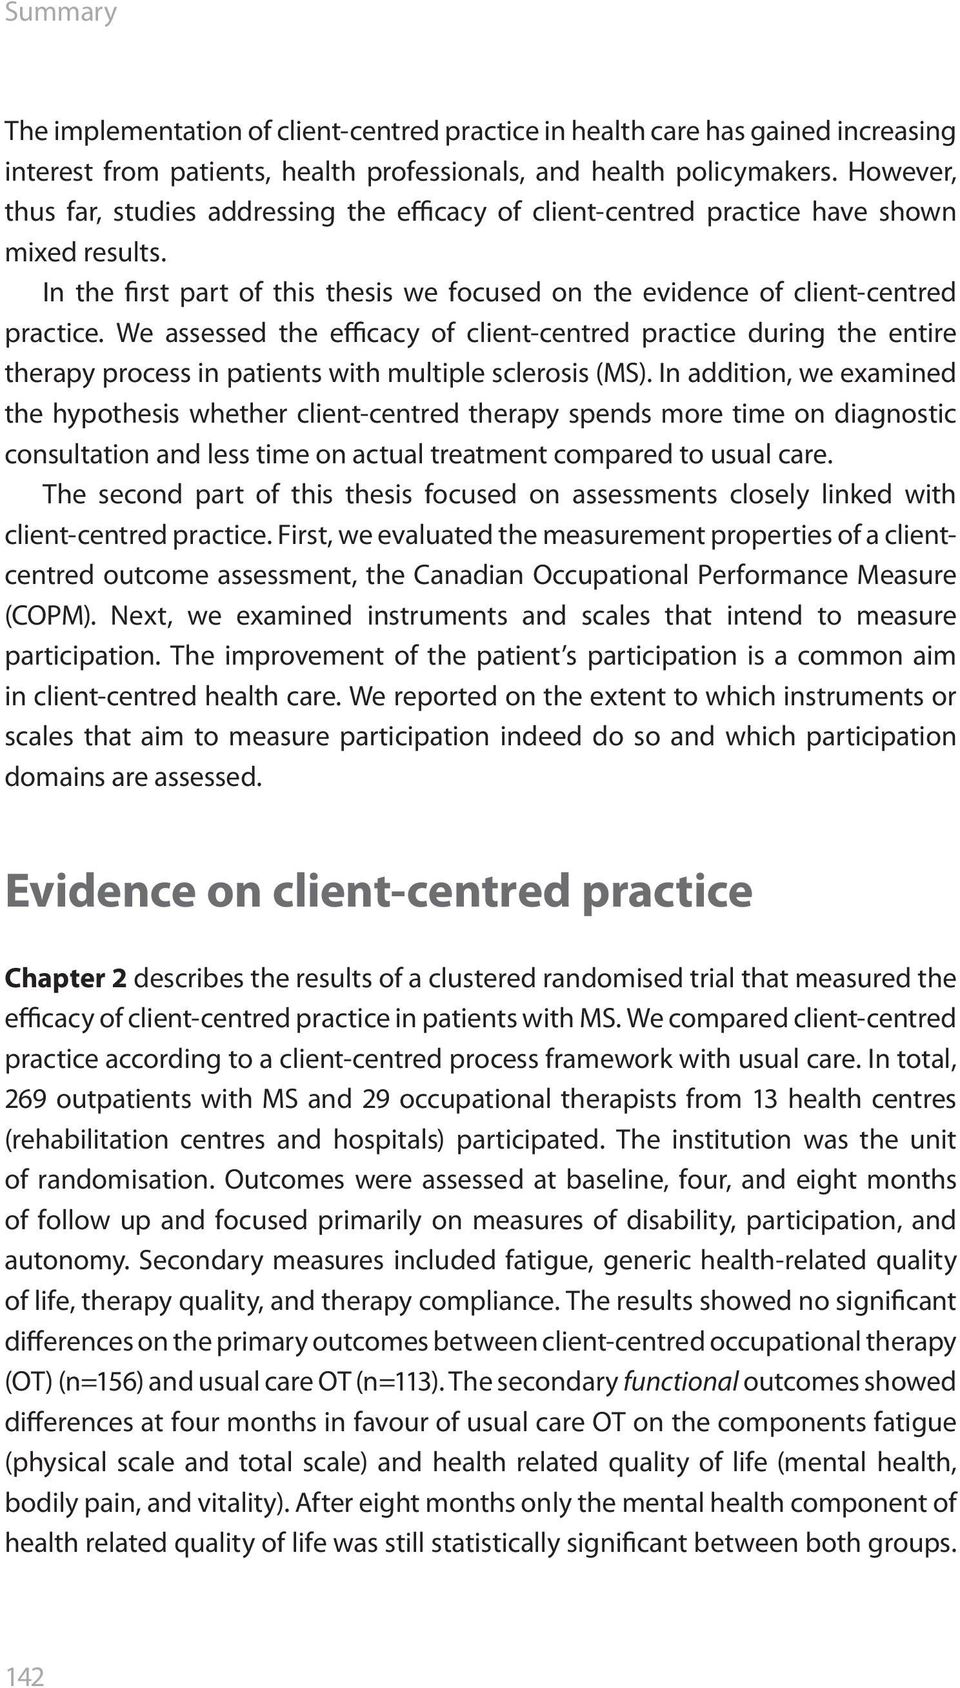 We assessed the efficacy of client-centred practice during the entire therapy process in patients with multiple sclerosis (MS).